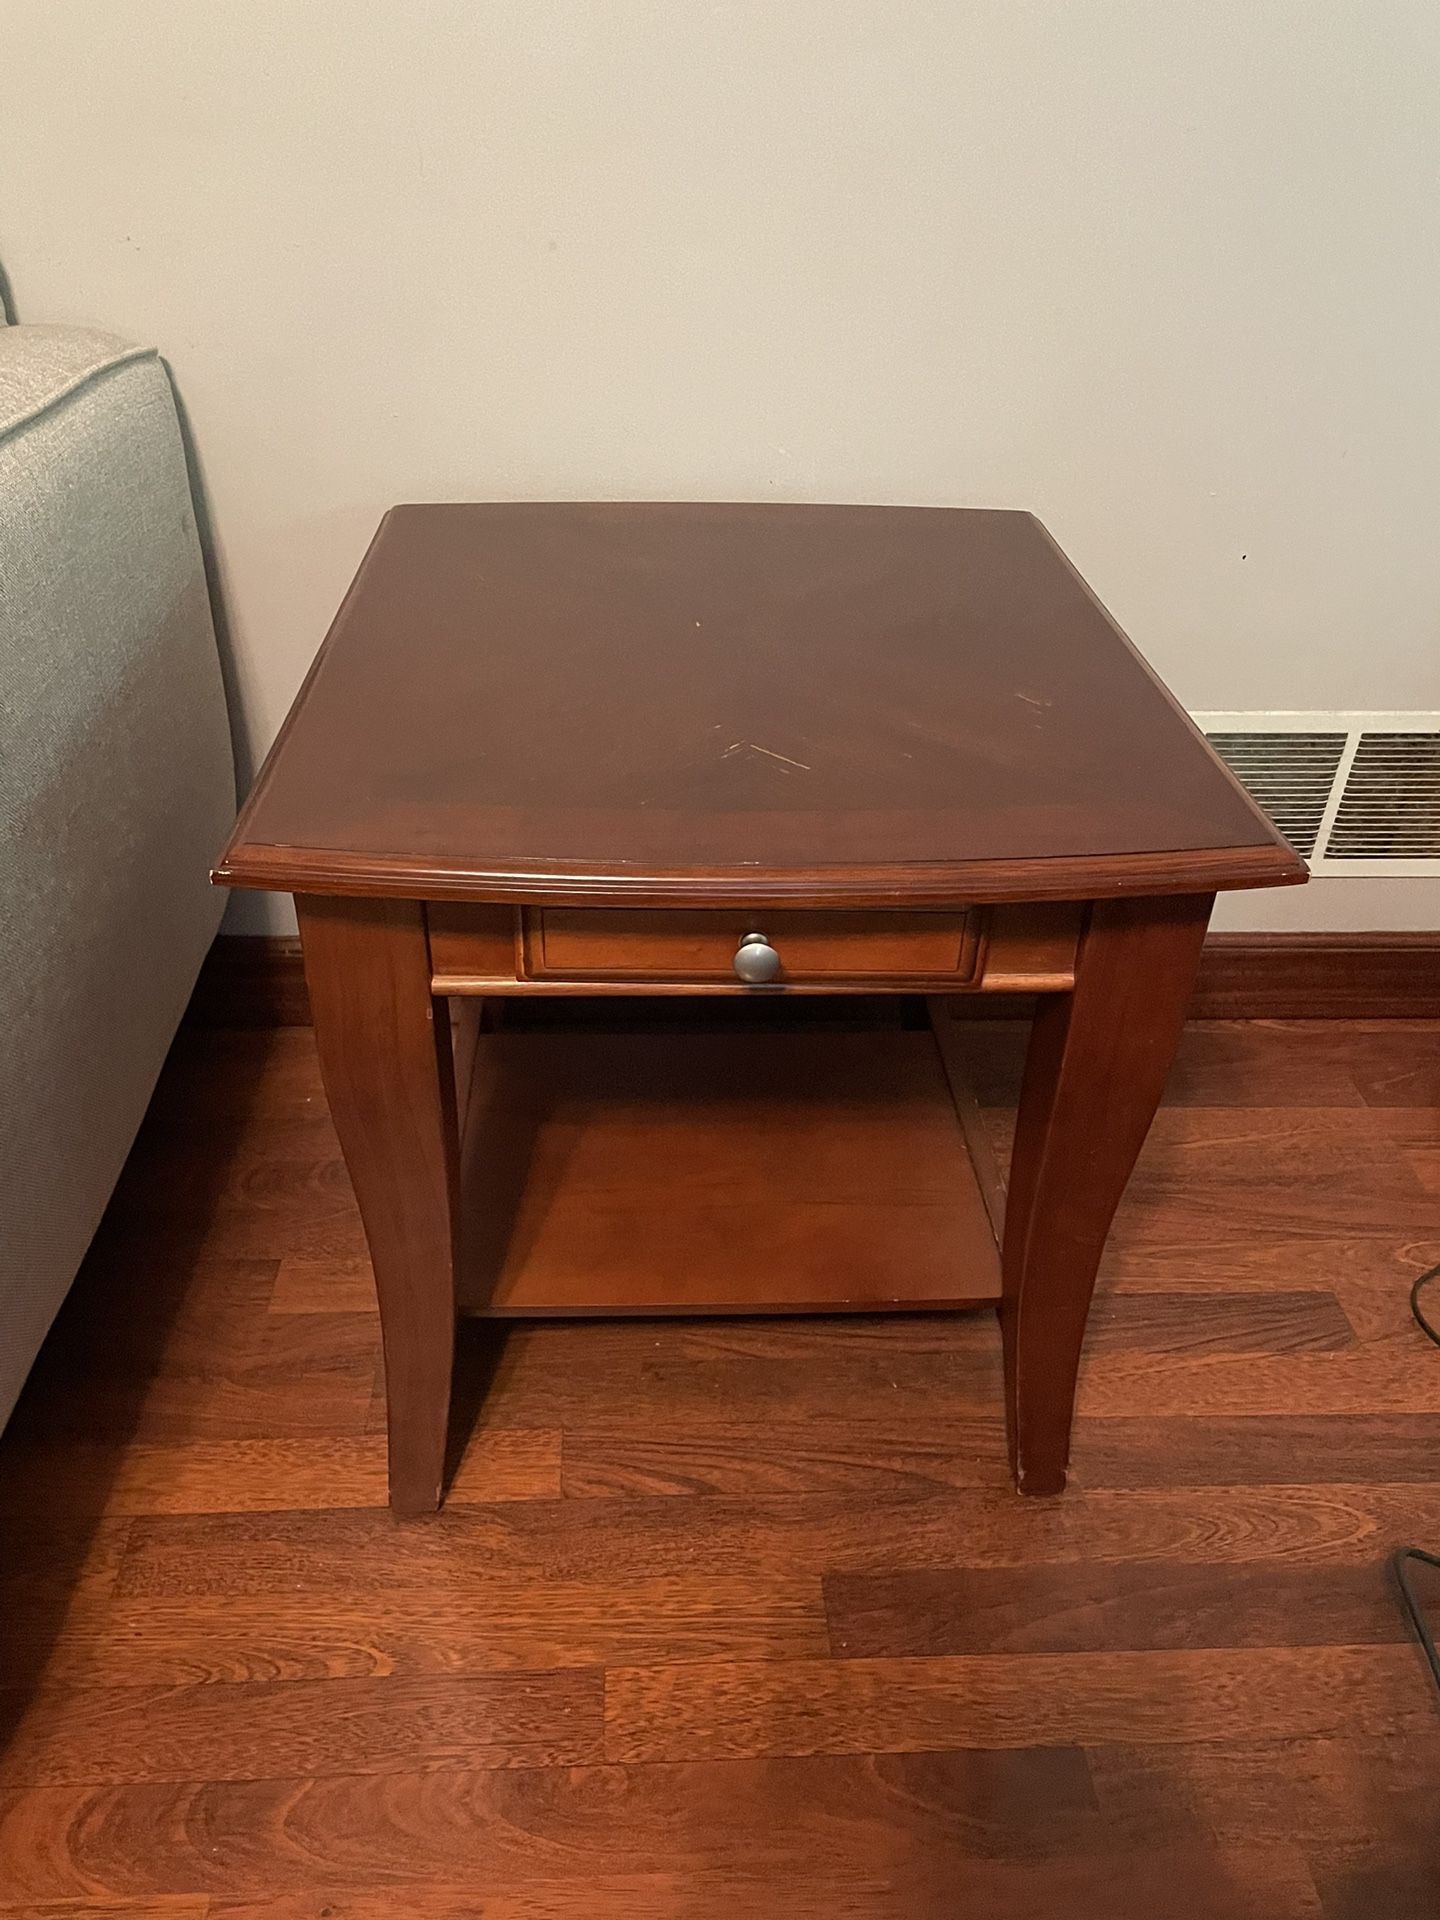 Brown wooden side table